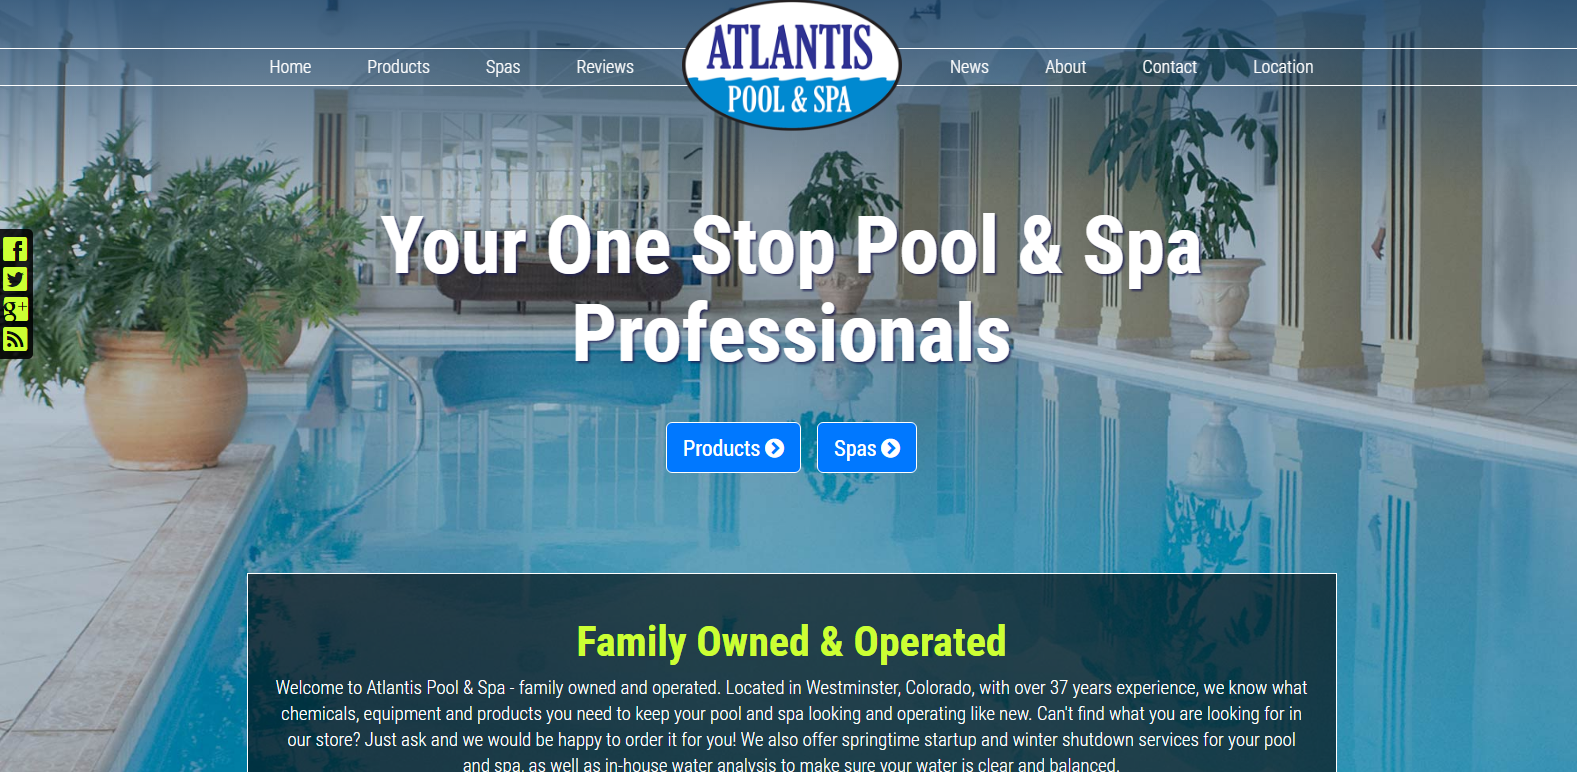 
New Upgrade Launched: Atlantis Pool & Spa